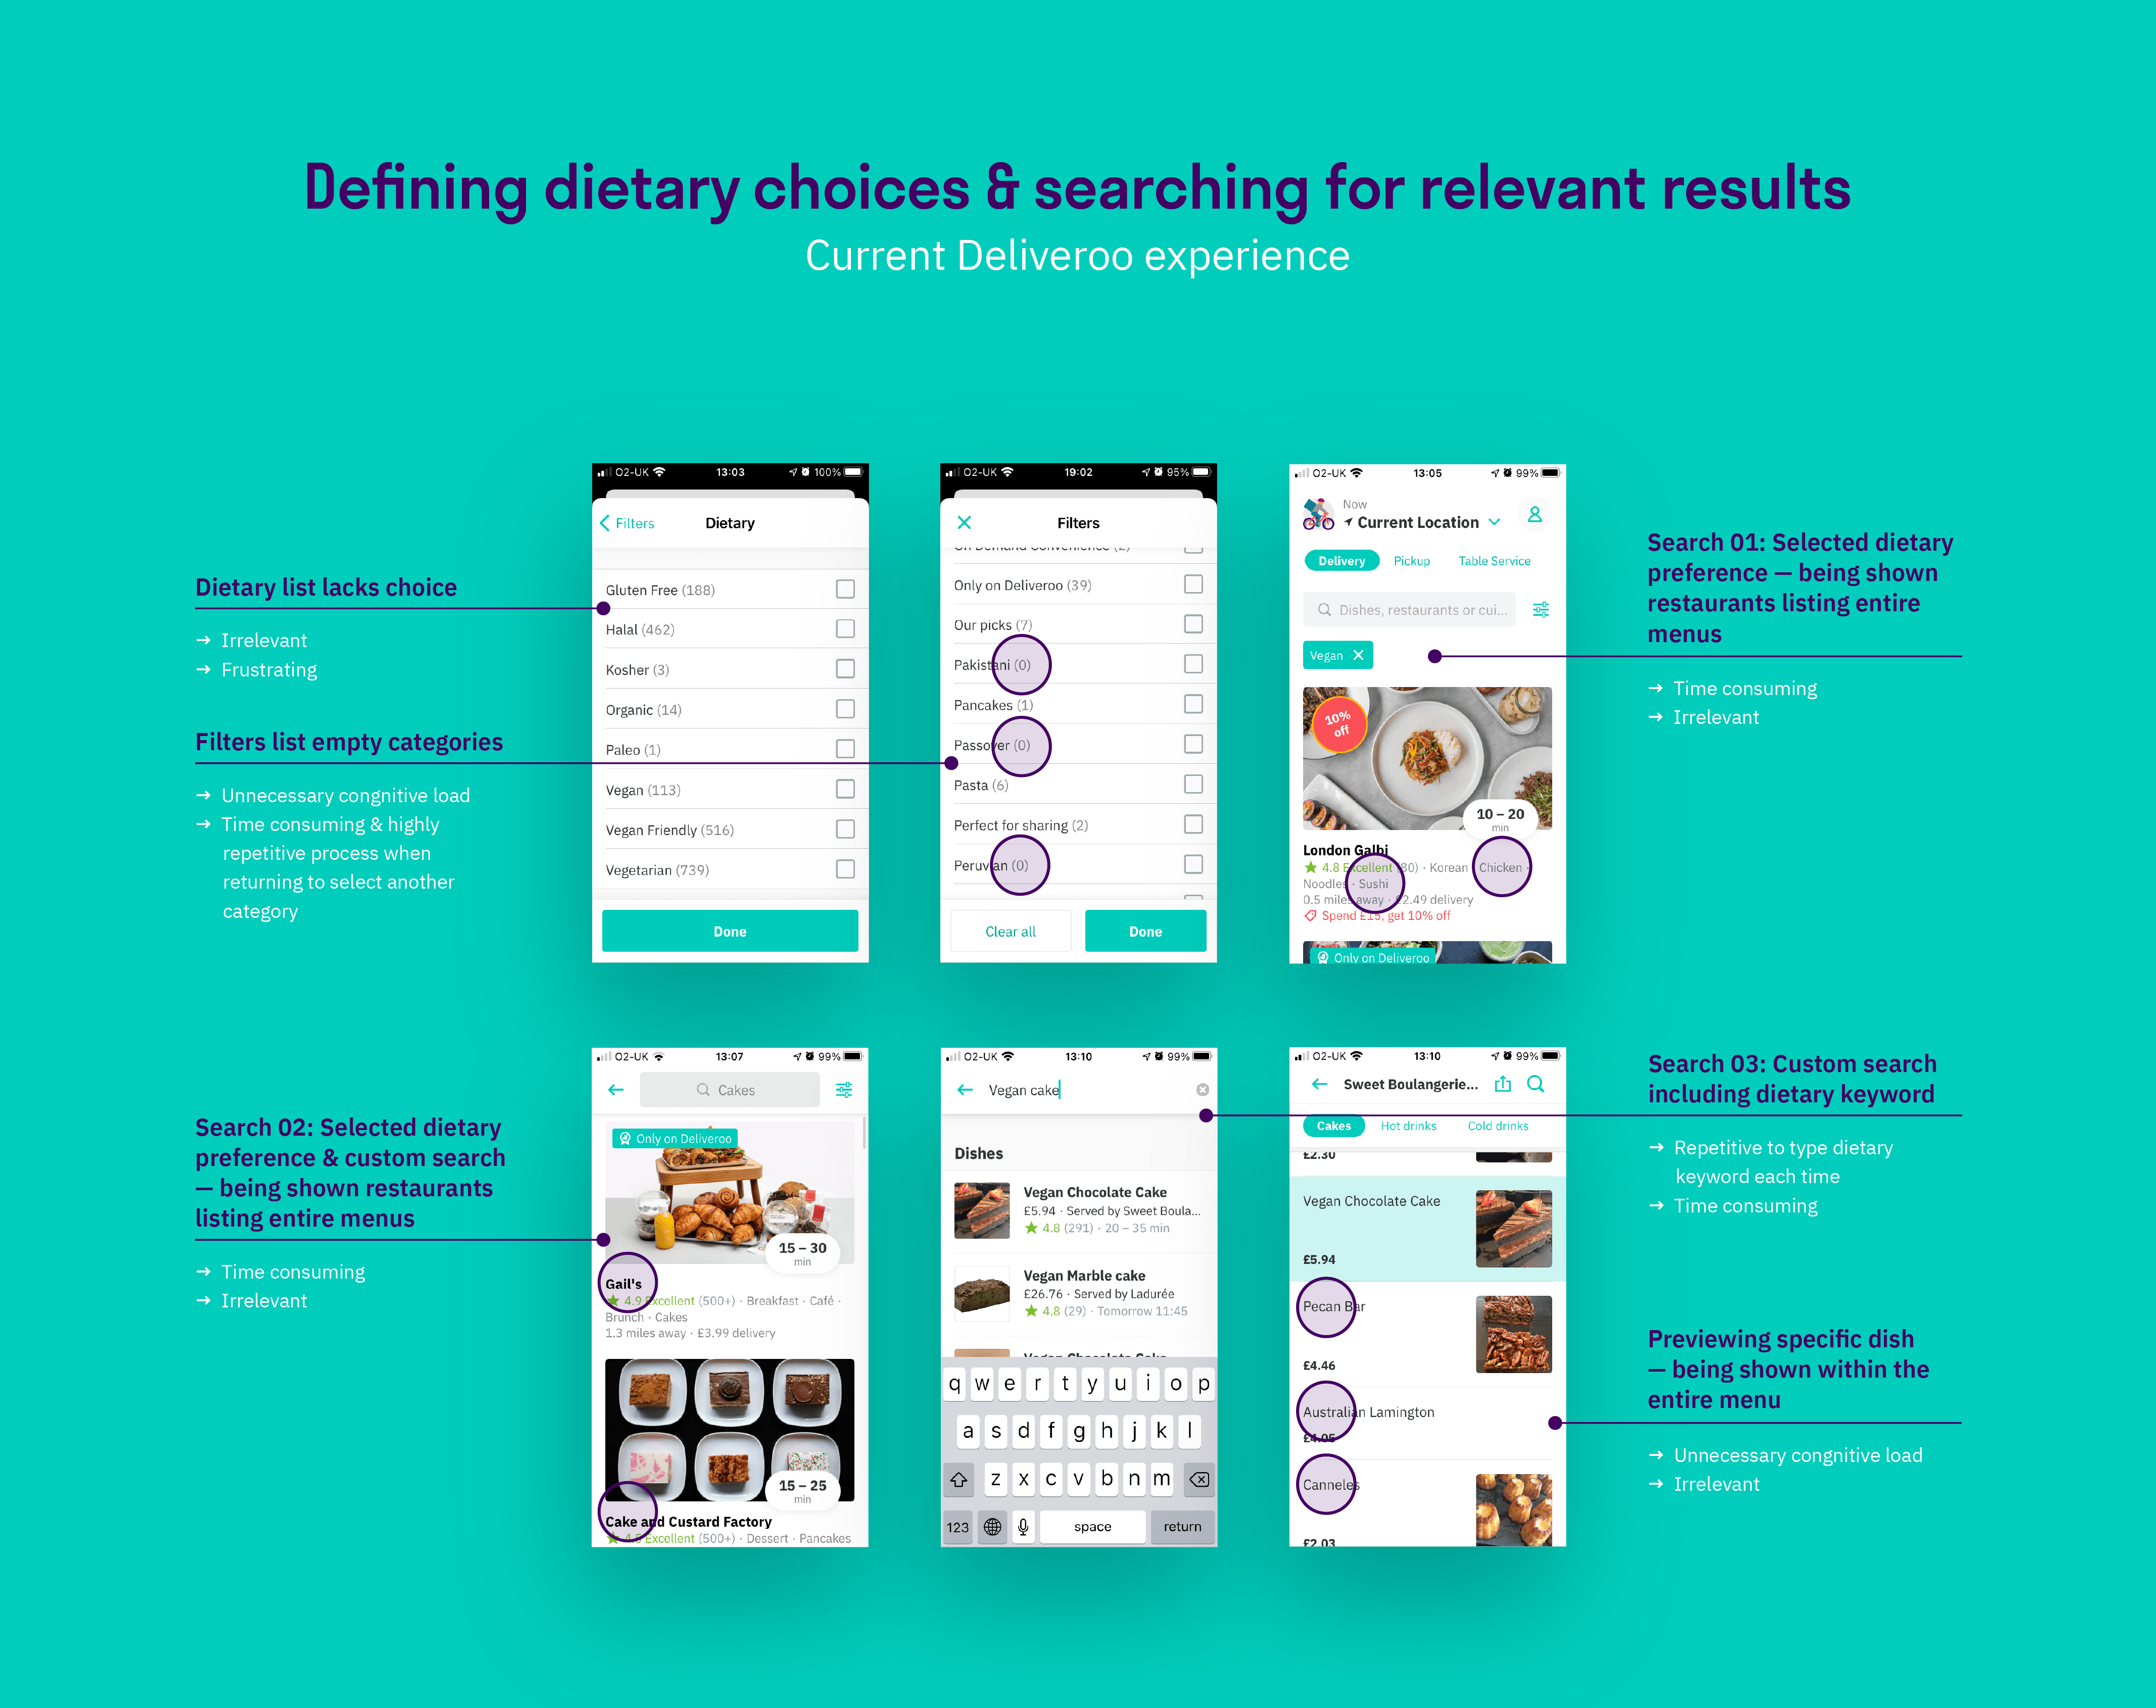 Deliveroo, specific dietary lifestyles & product innovation